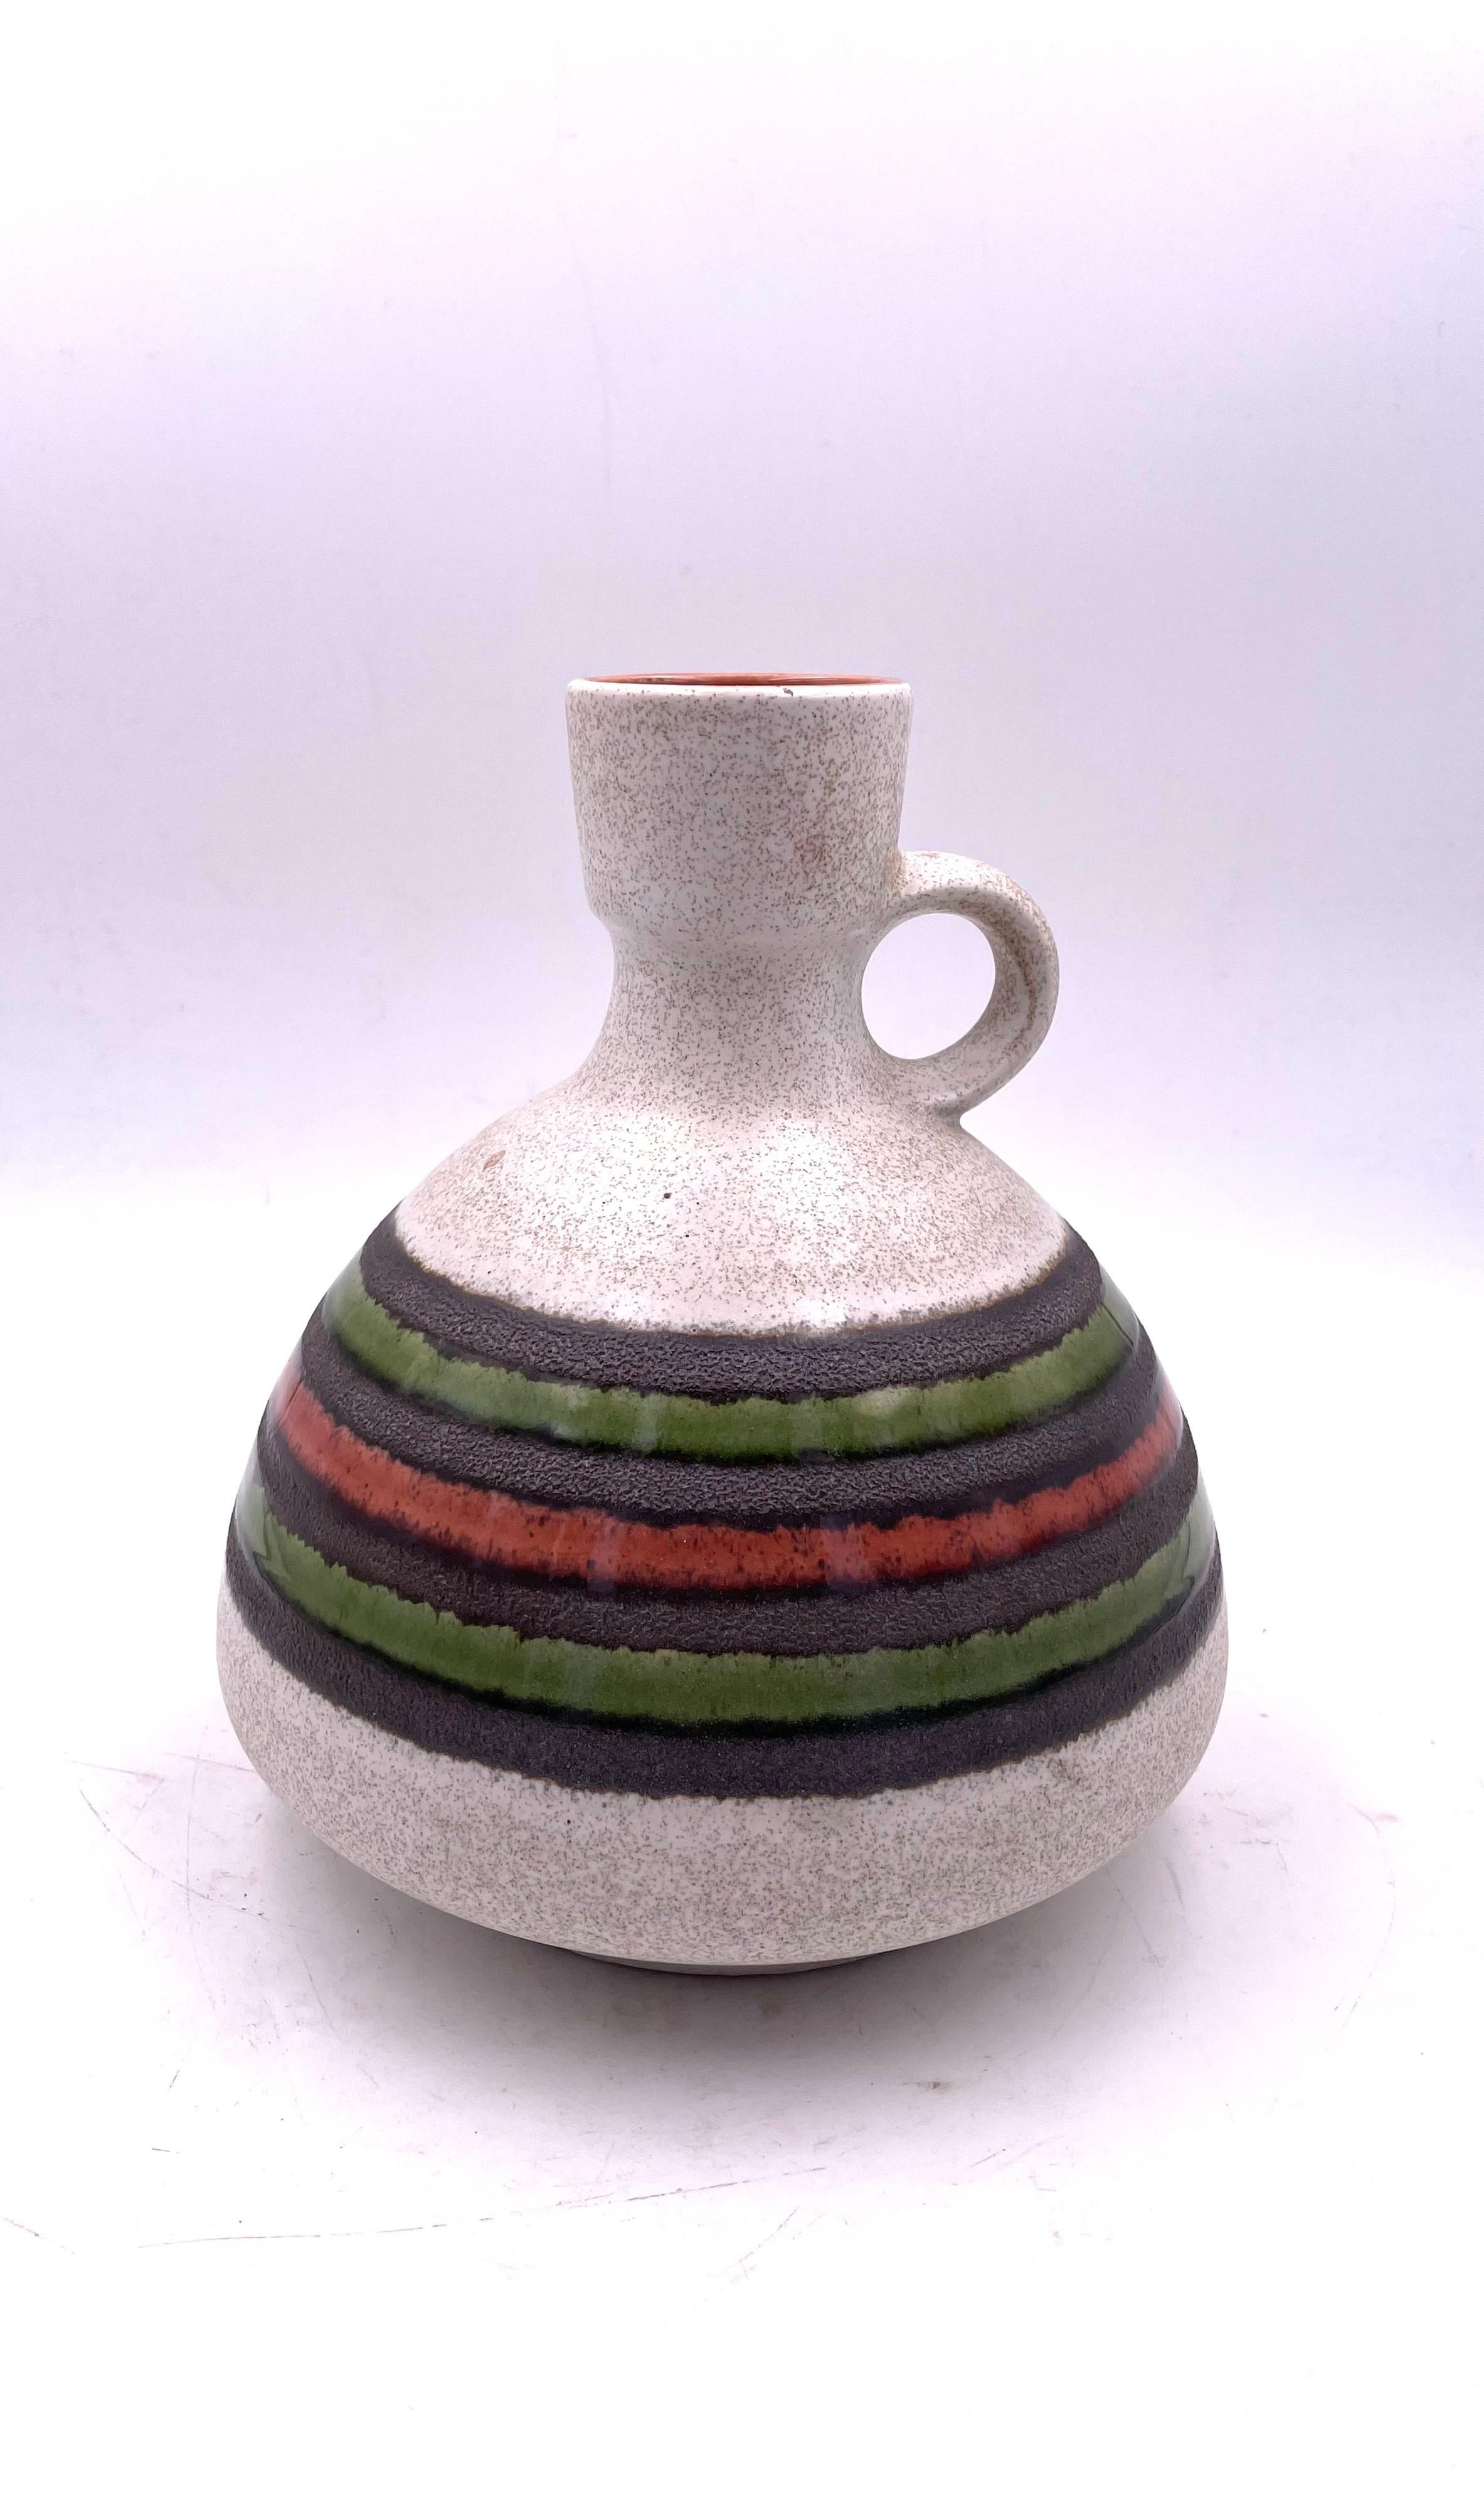 Beautiful ceramic vase pitcher, circa 1950's nice glaze made in west Germany no chips or cracks.